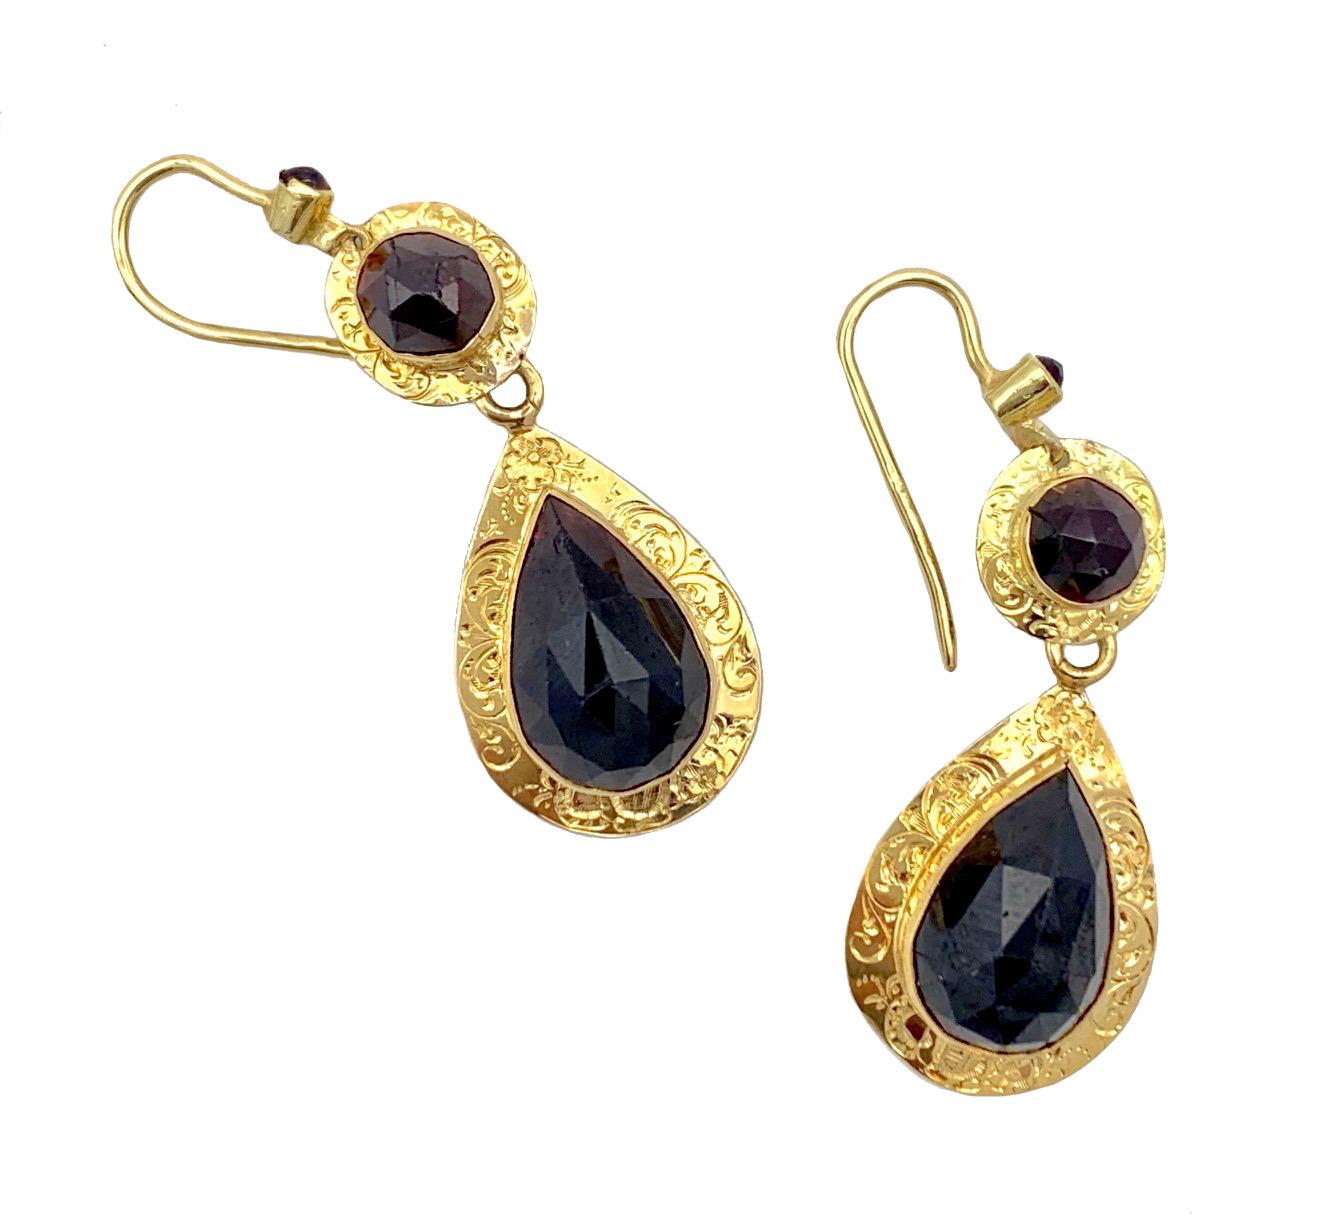 These elegant earrings were handcrafted in 1845 ca. Each earring is set with a small garnet cabochon near the hook. The top round segment is set with a round facetted garnet in an engraved gold mount from which a drop shaped element set with a drop